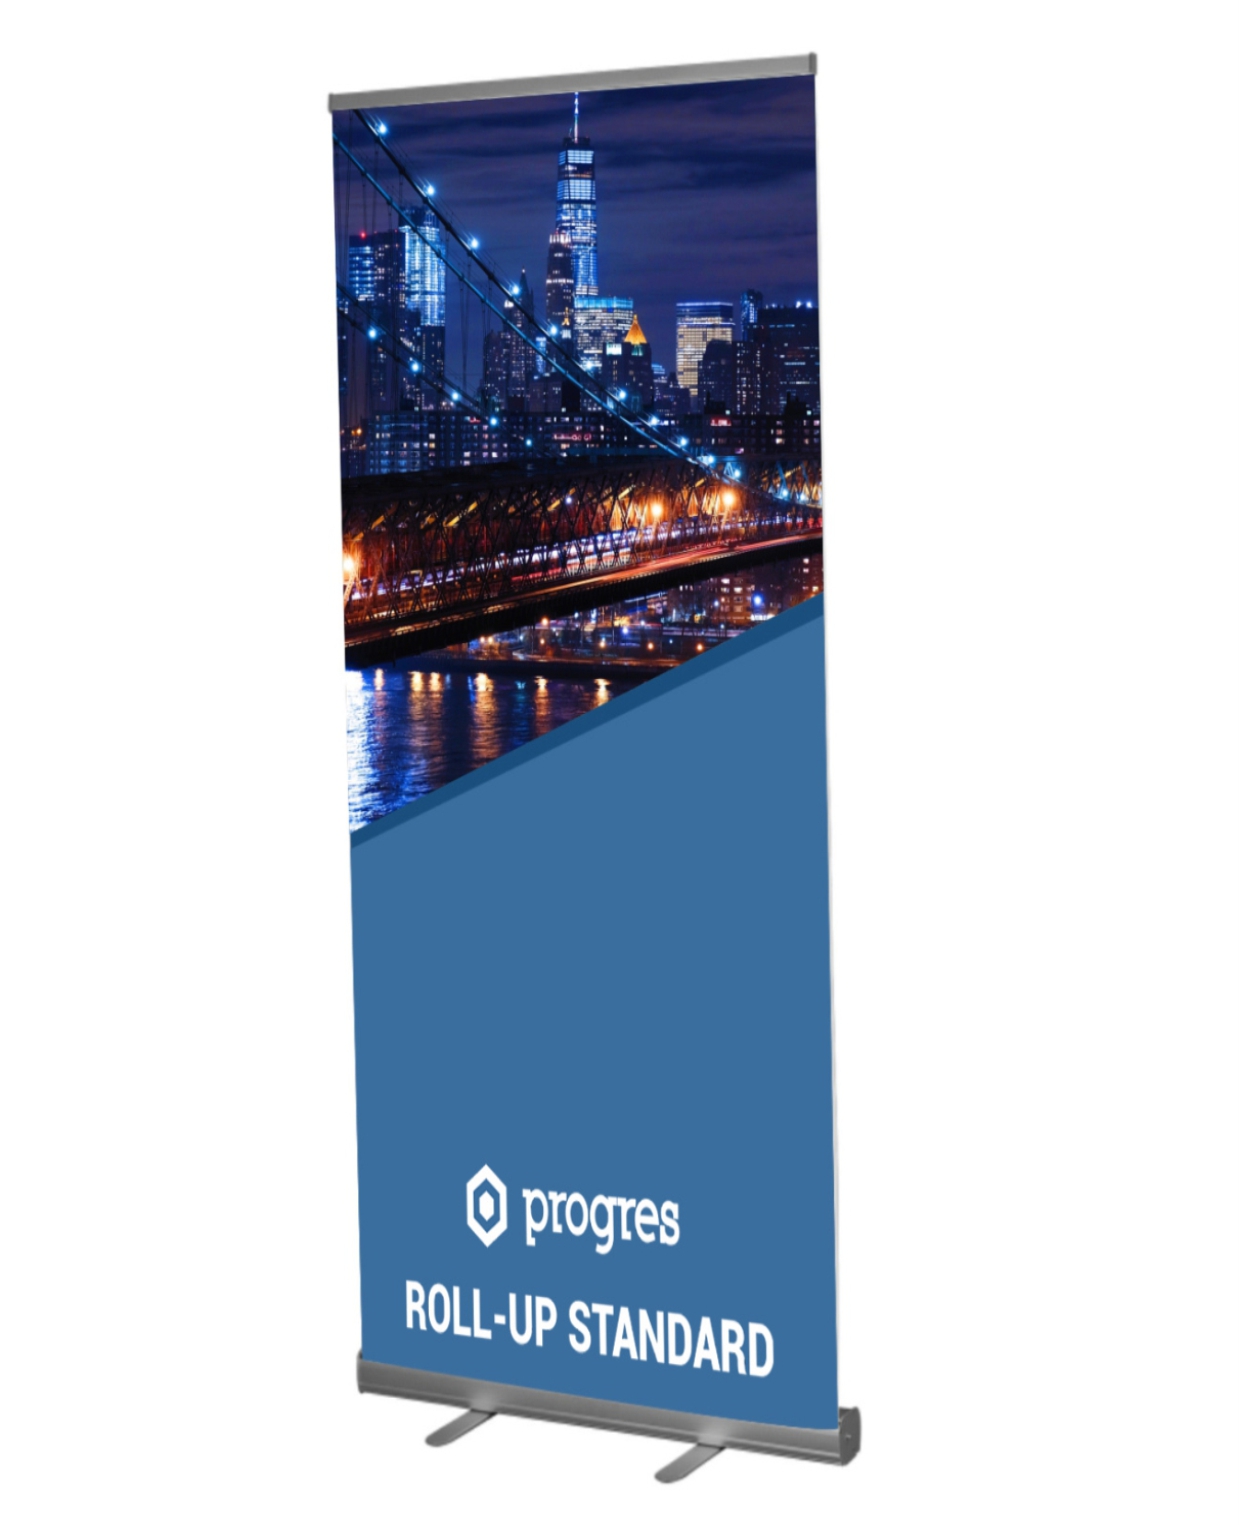 Roll up classic 100x200 cm - Roll-up